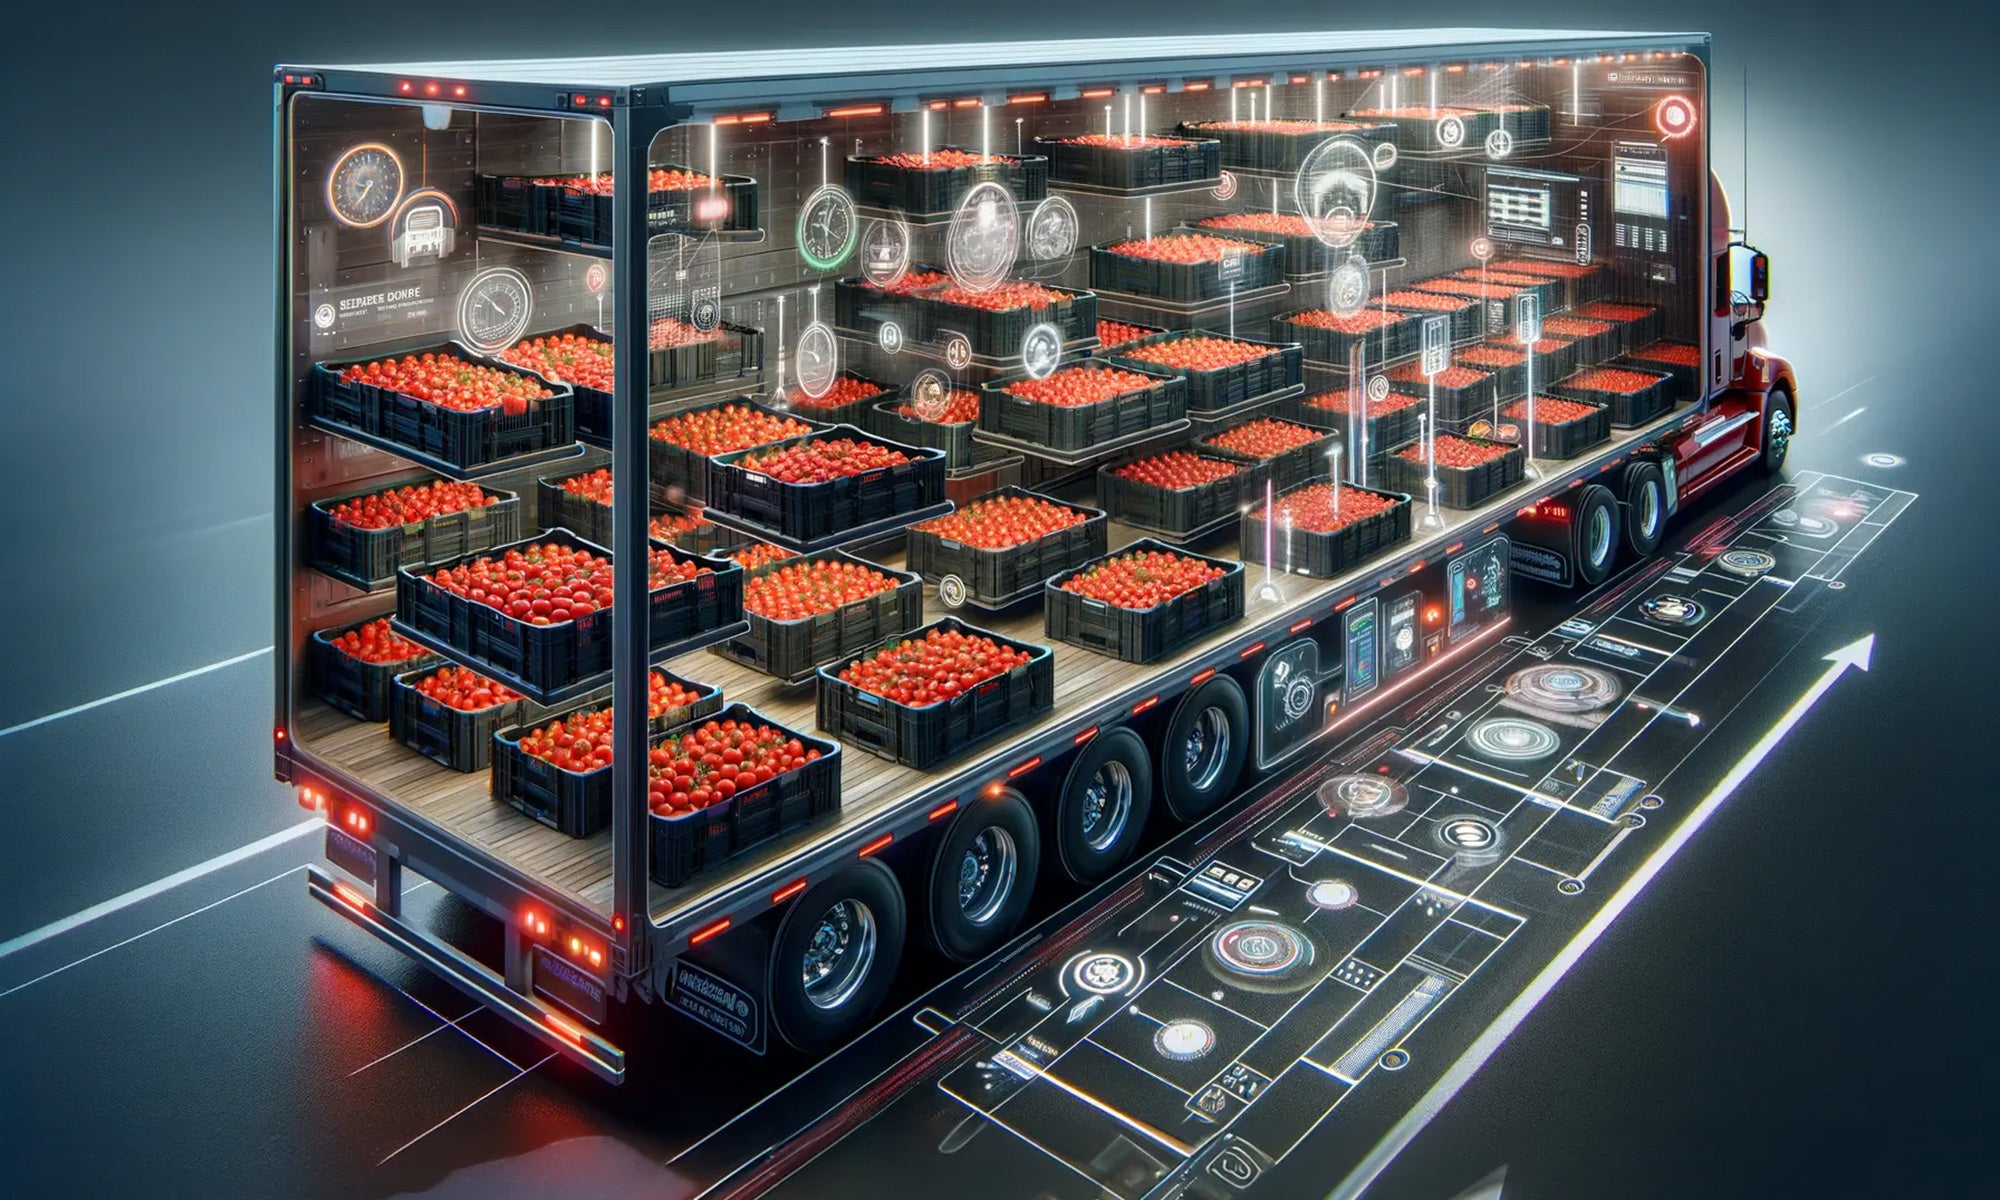 A hypothetical tomato truck using artificial intelligence